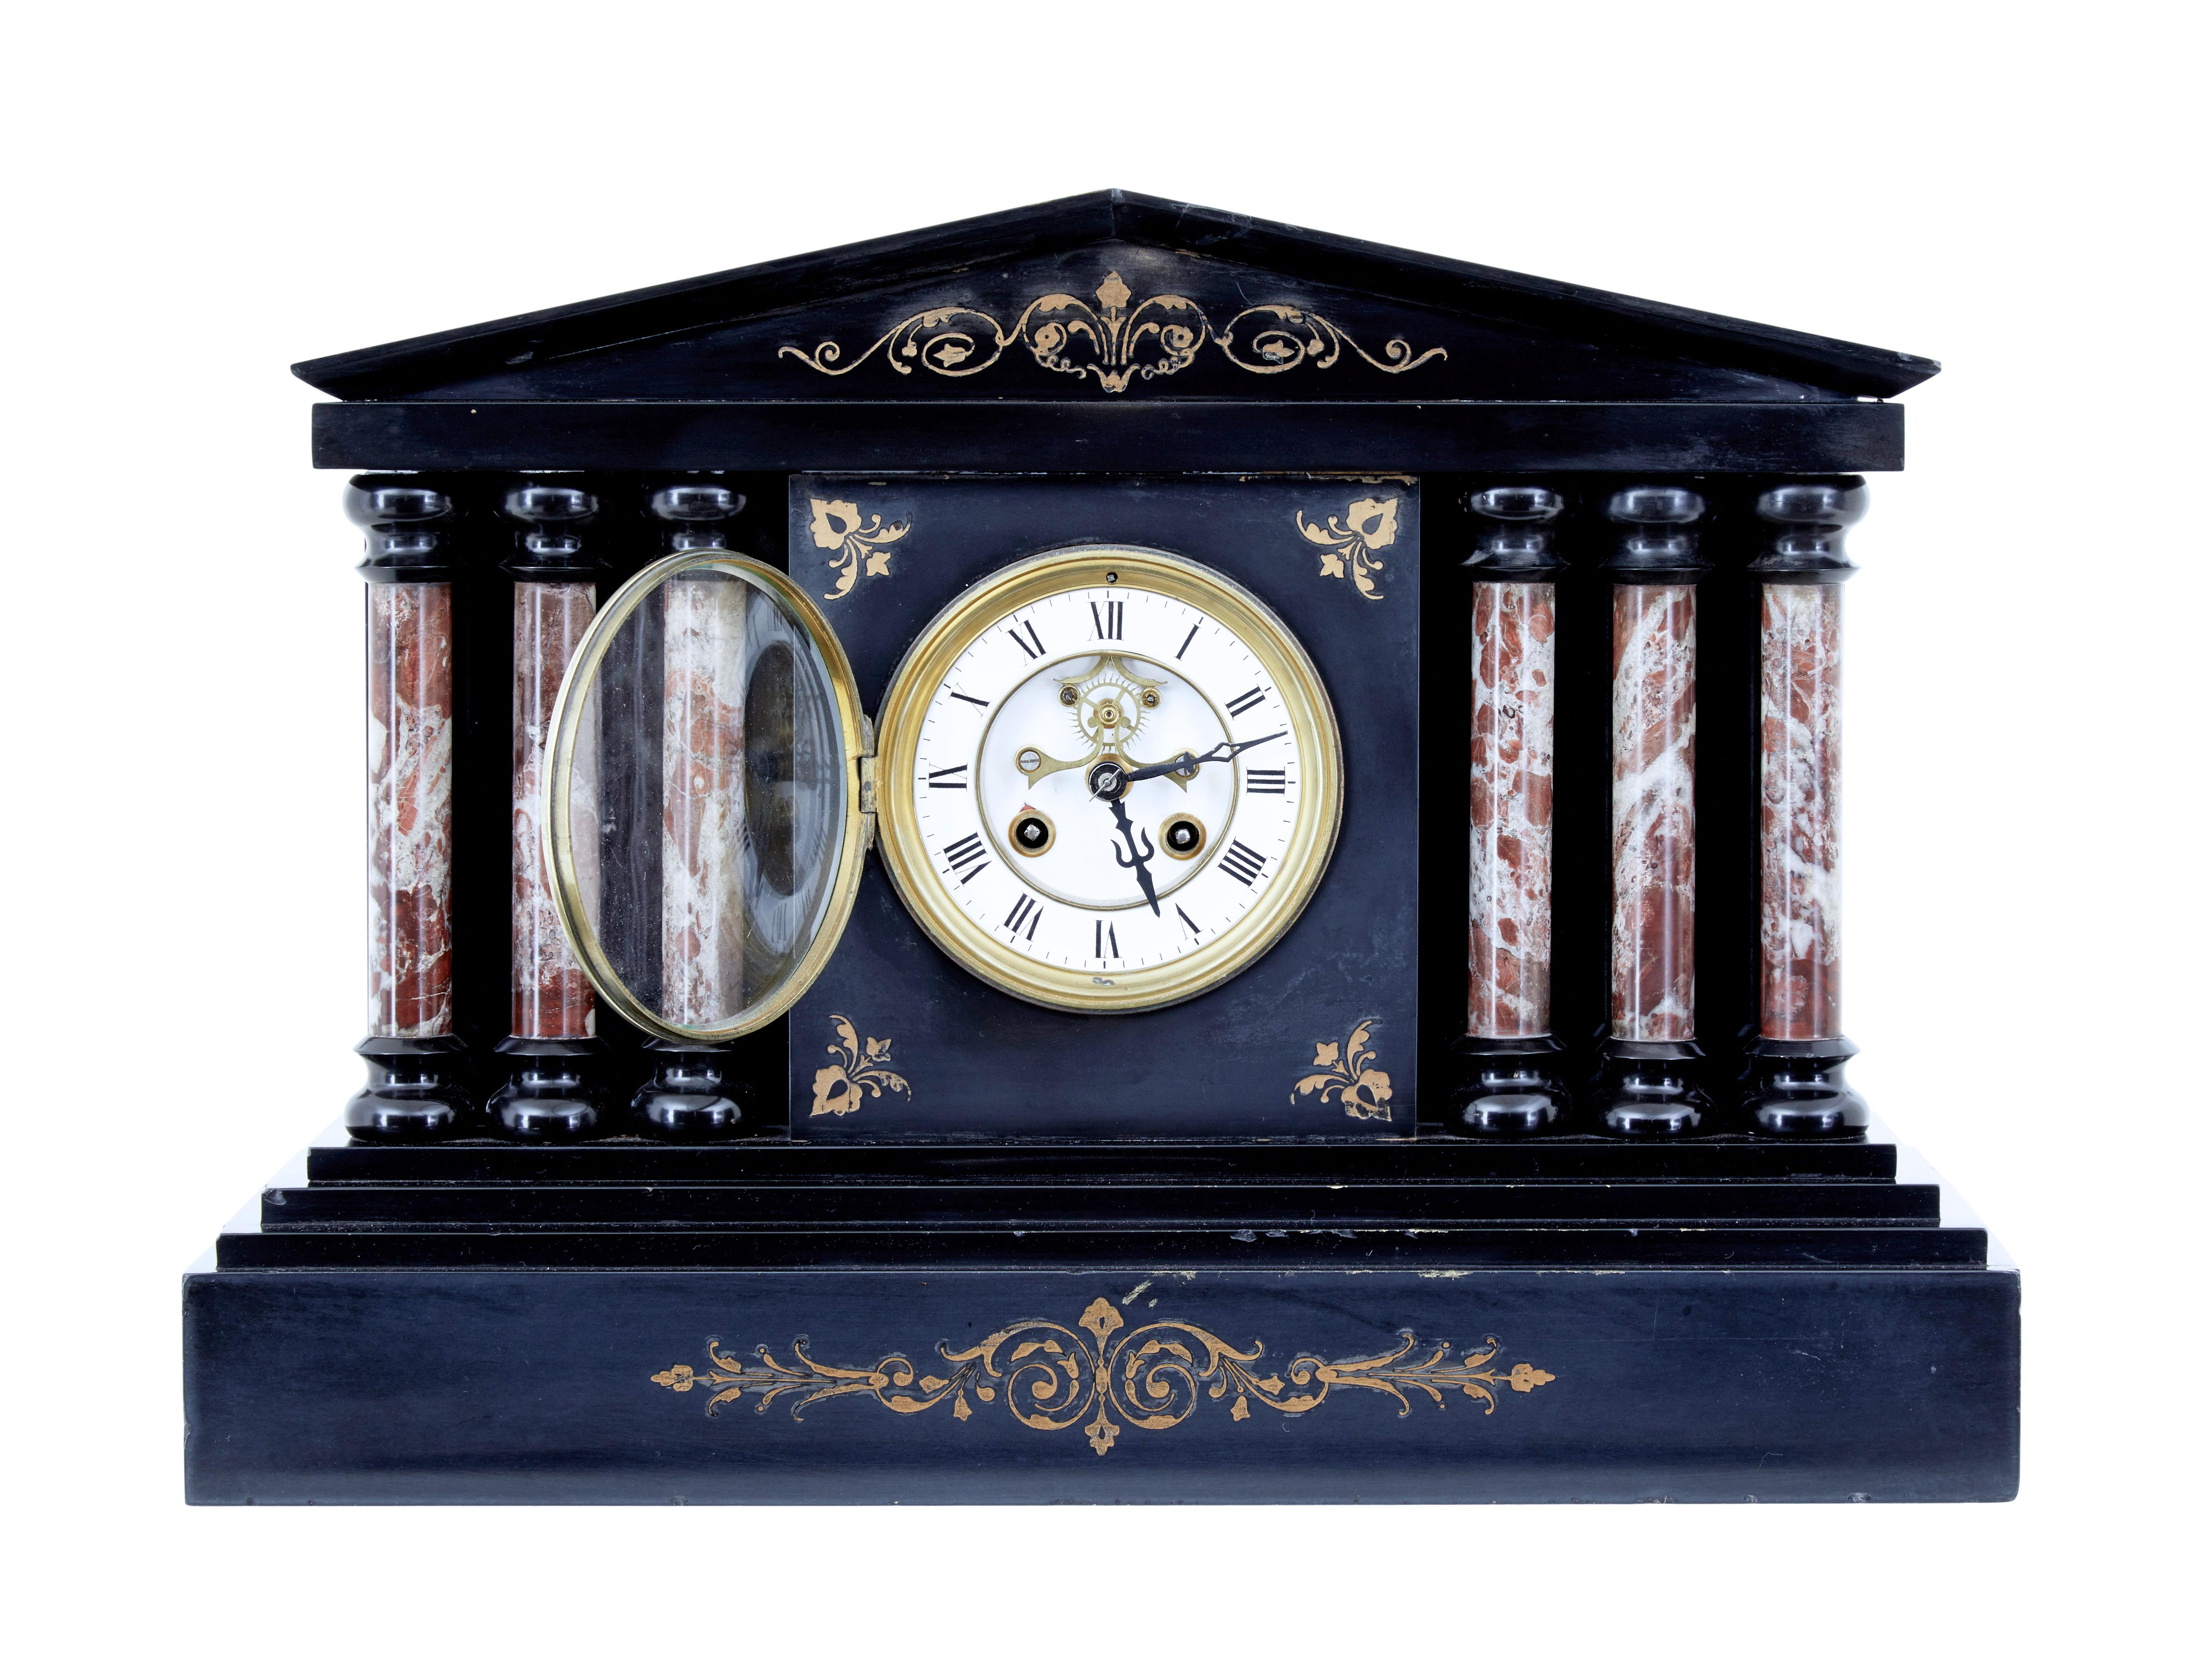 19th century Victorian black marble mantle clock circa 1890.

Victorian mourning clock made in black marble. Pointed architectural pediment with gold leaf swag design below. White enamel face with roman numerals.

Clock face is flanked either